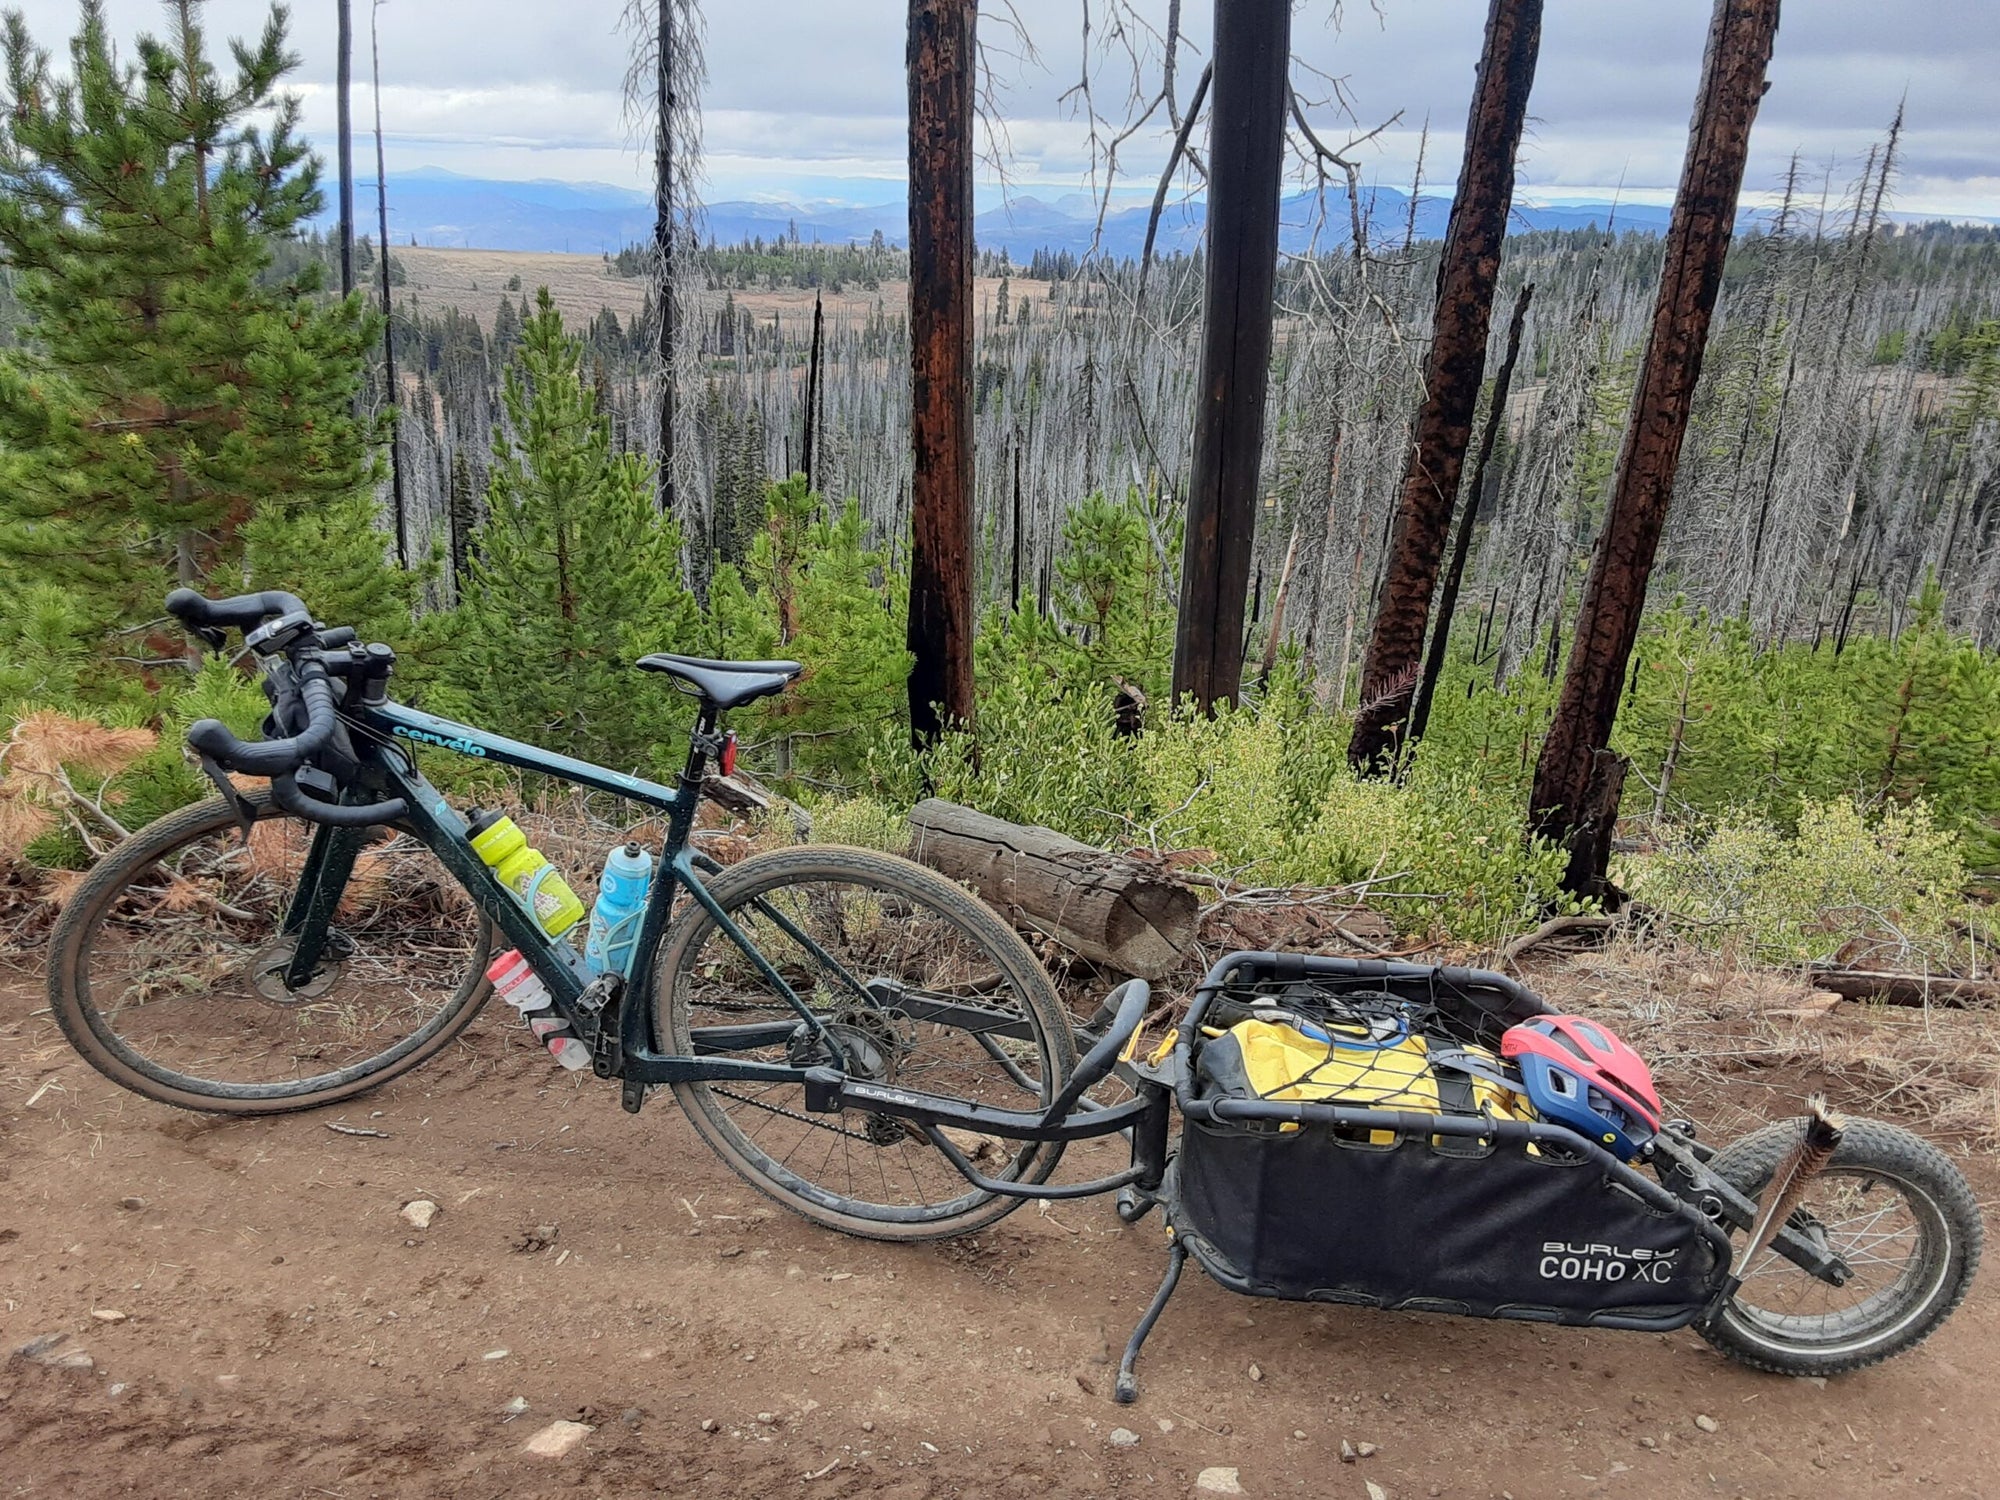 bike with coho xc bike trailer attached sitting on dirt road overlooking valley